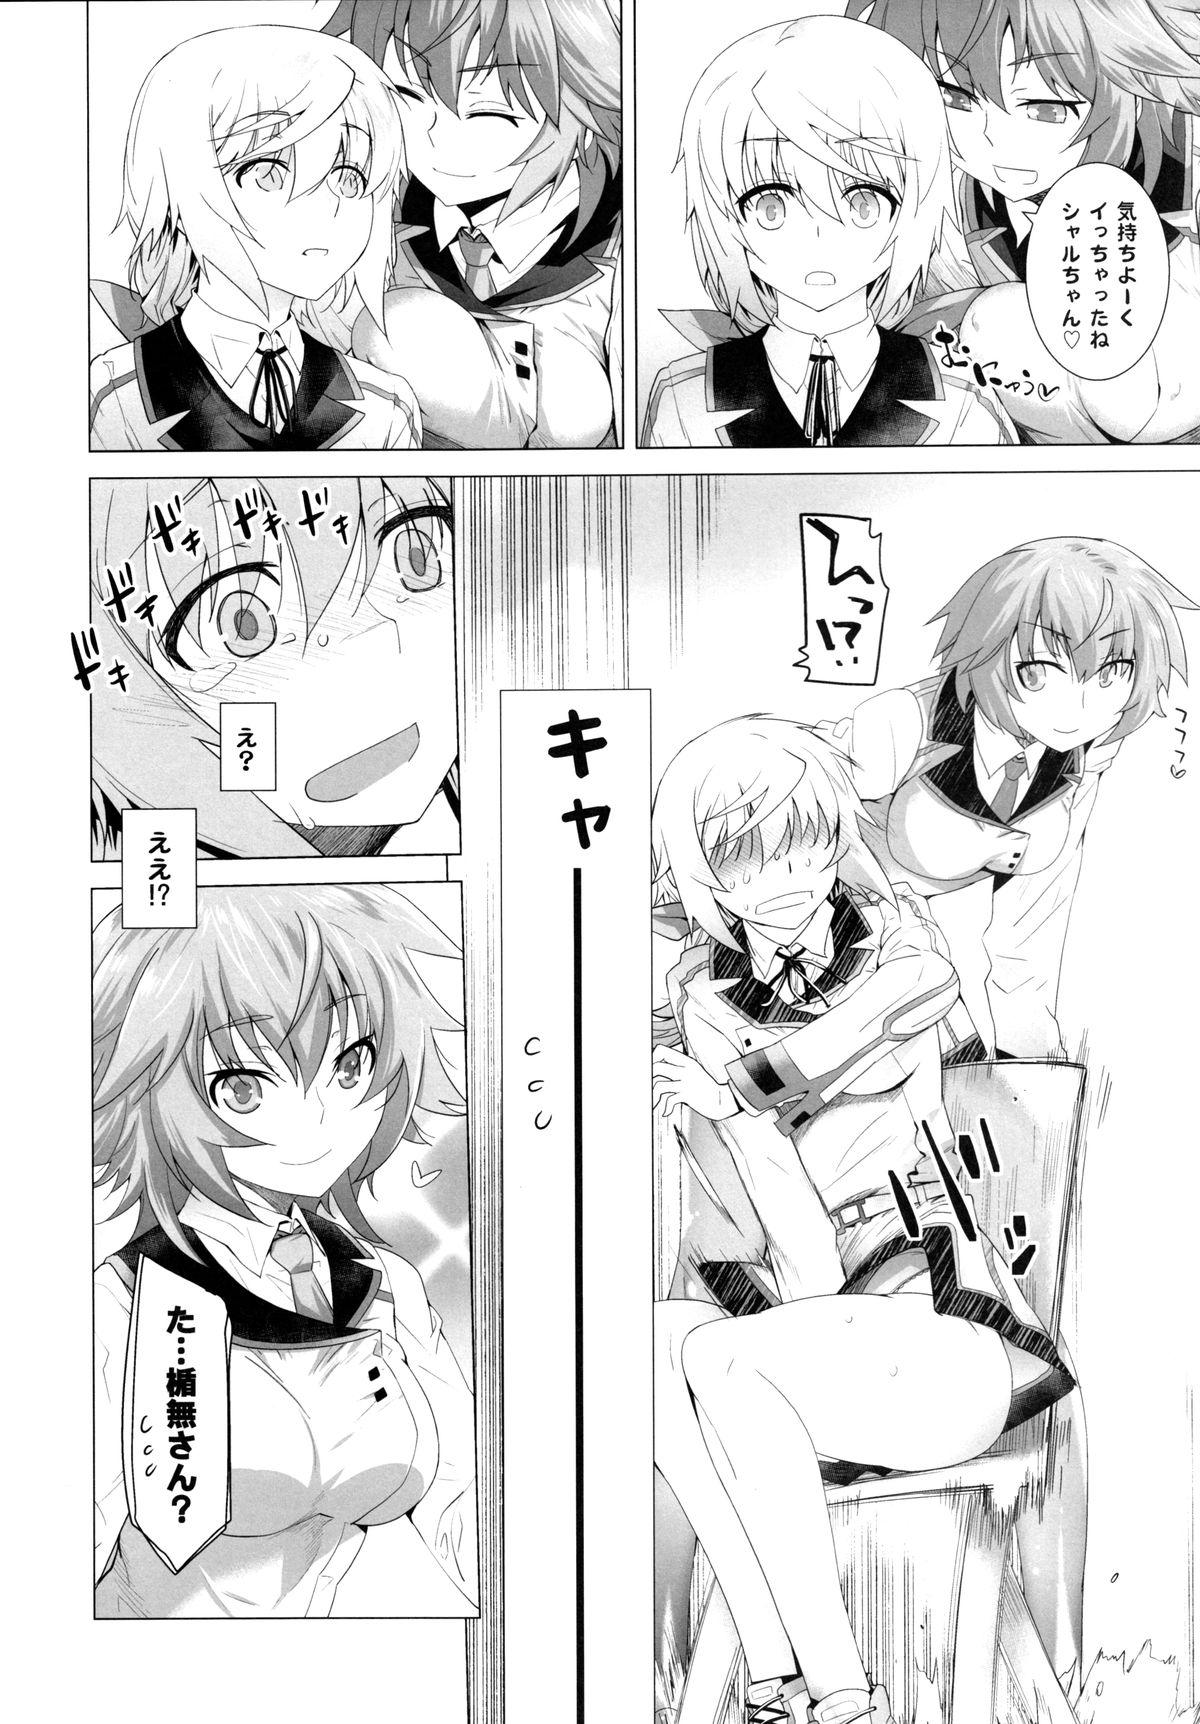 Old Vs Young LOVE SLAVE 2 - Infinite stratos Eat - Page 10